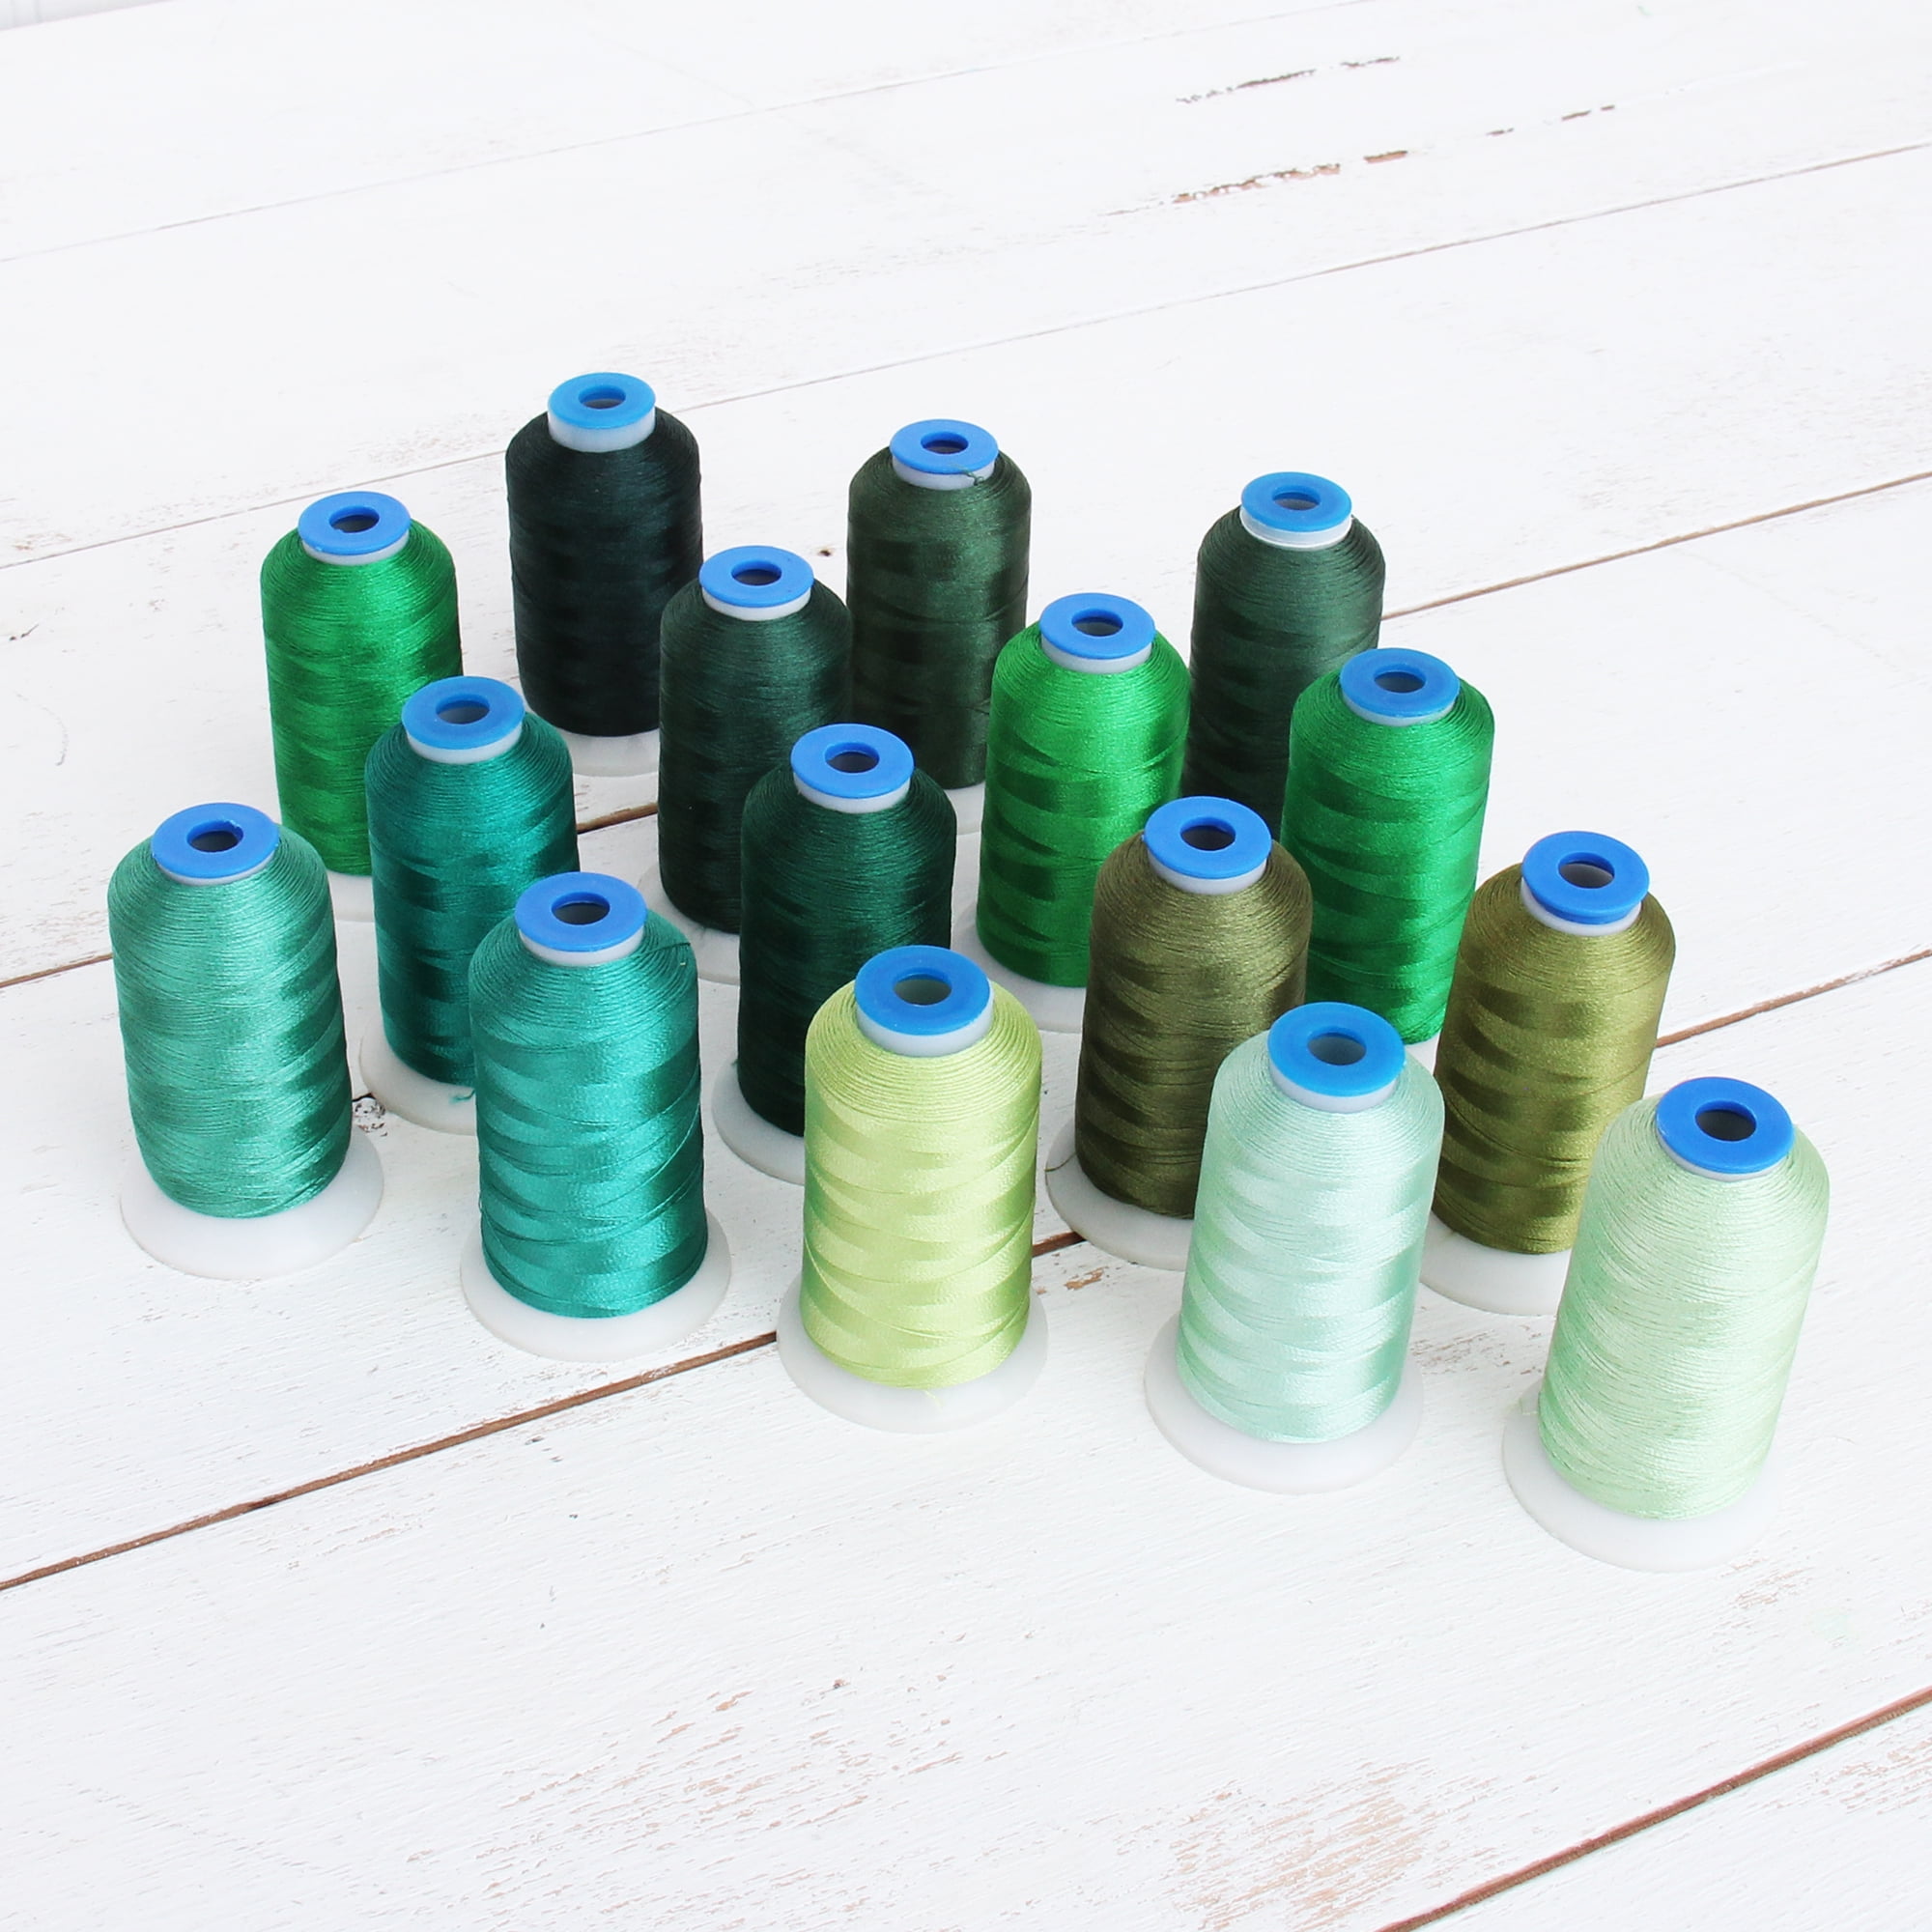 Serger Thread - 4 Cone Set - Polyester Sewing - 2750 Yards -Pine Green —